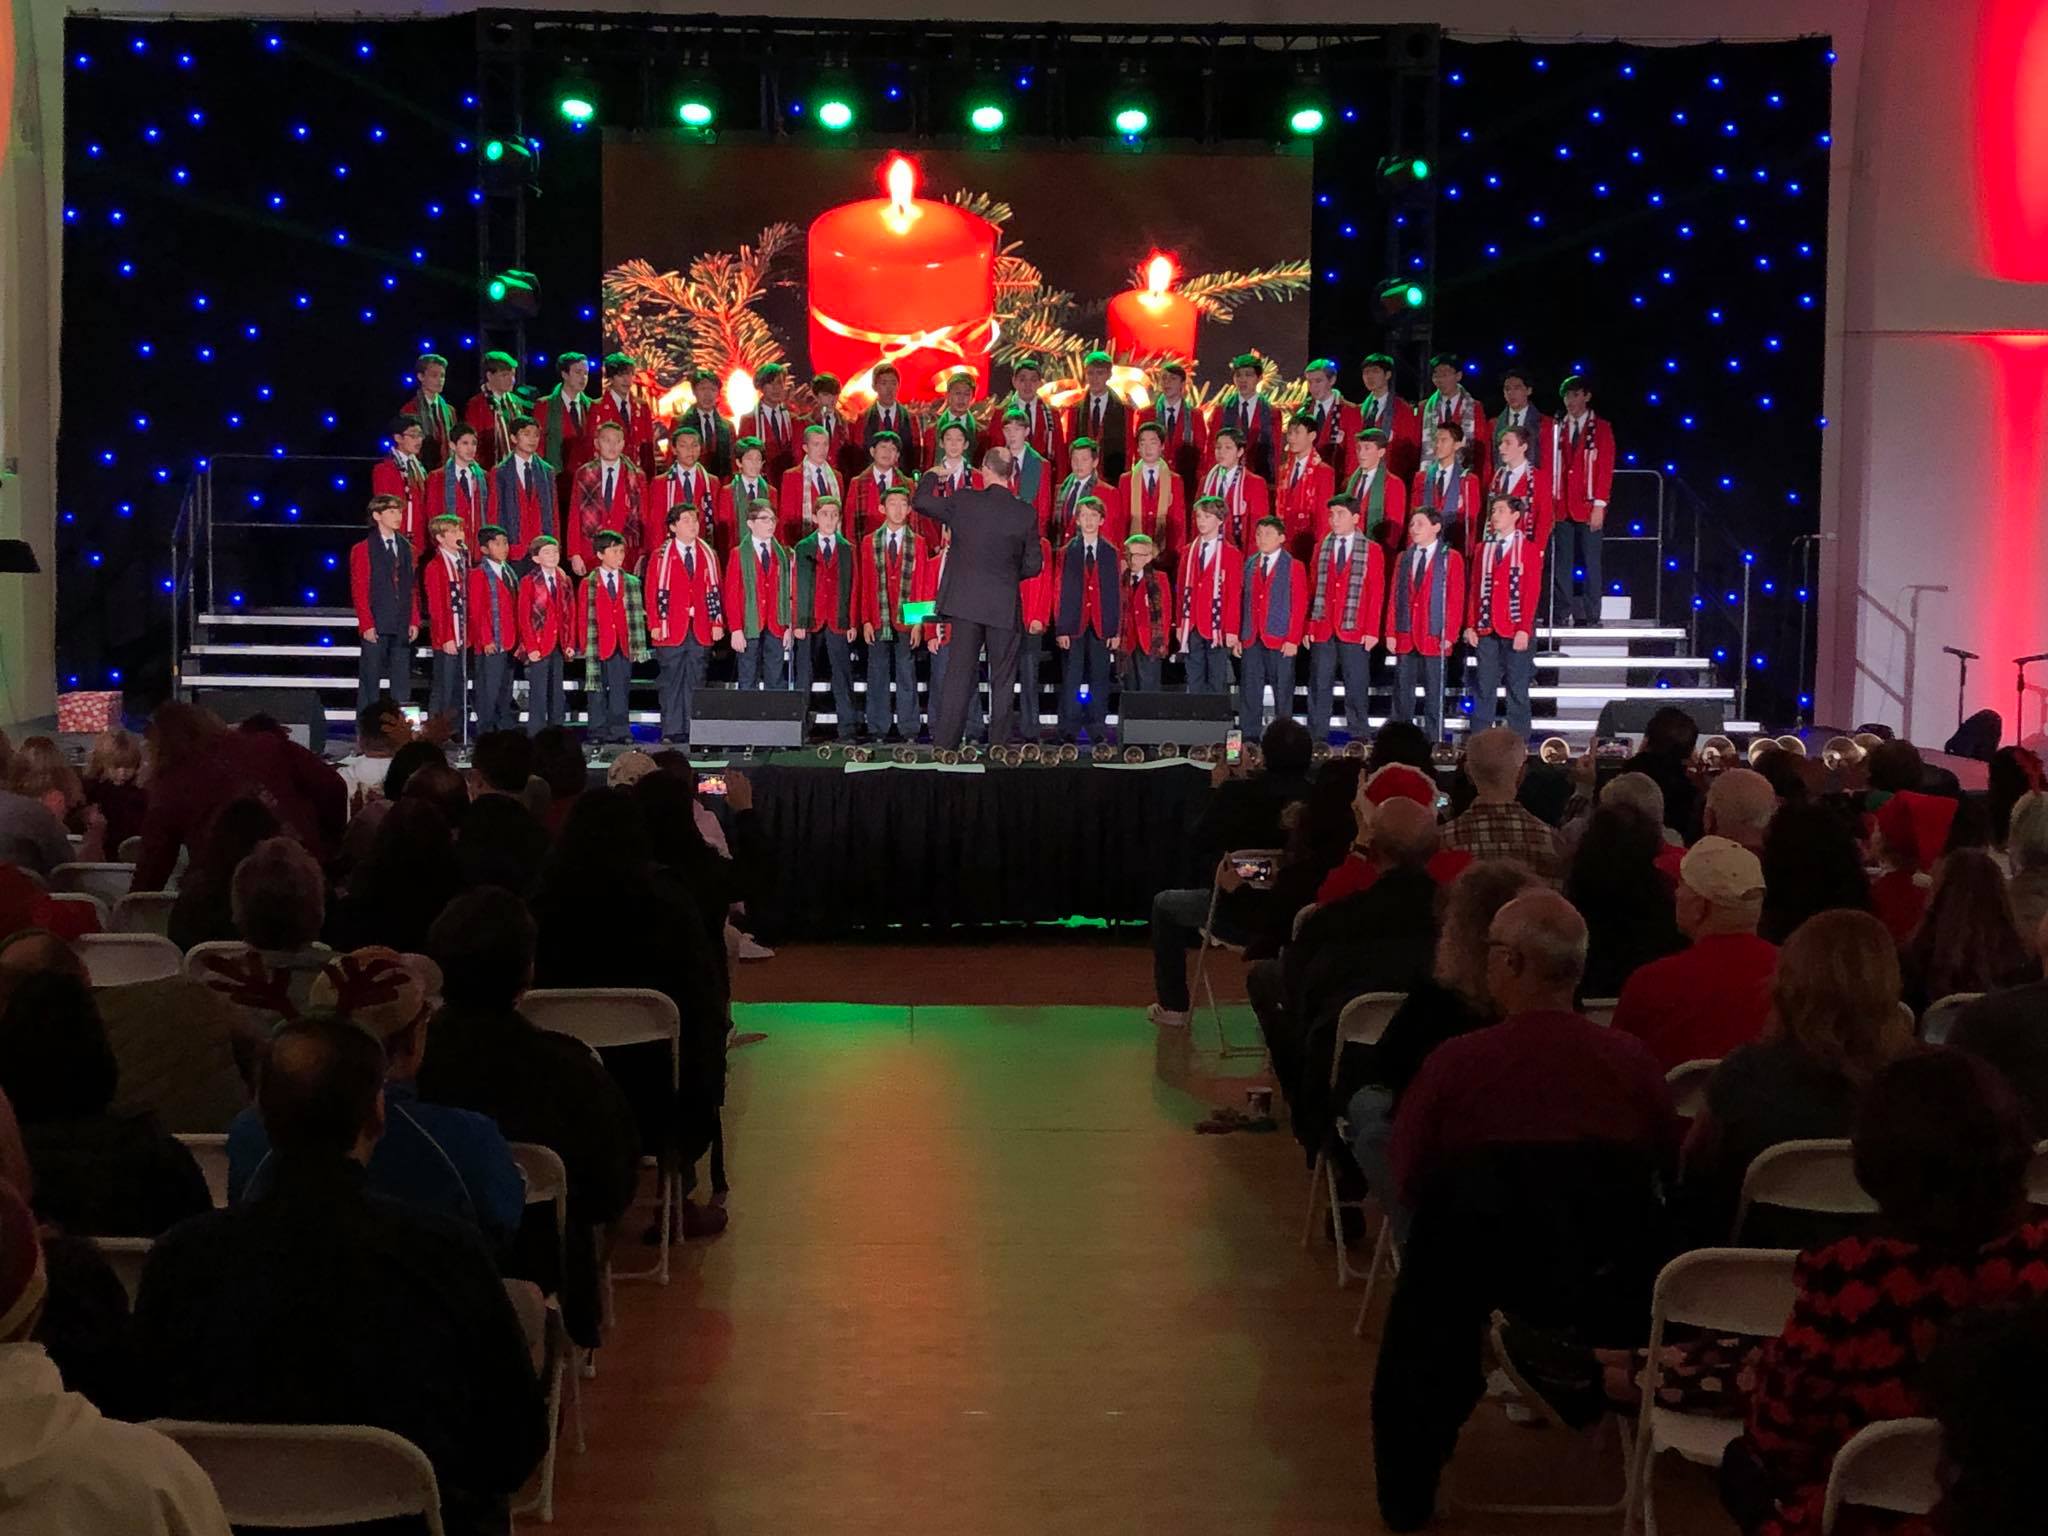 12-22-18 Christmas Concert at Mile Square Park 12